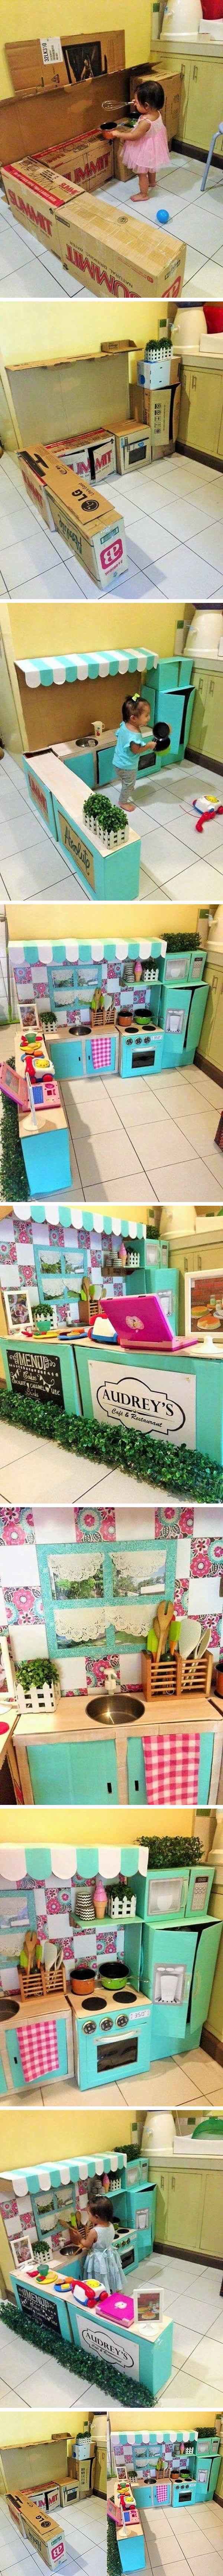 Parenting Done Right! This Mom Built Her Daughter A Kitchen From Cardboard